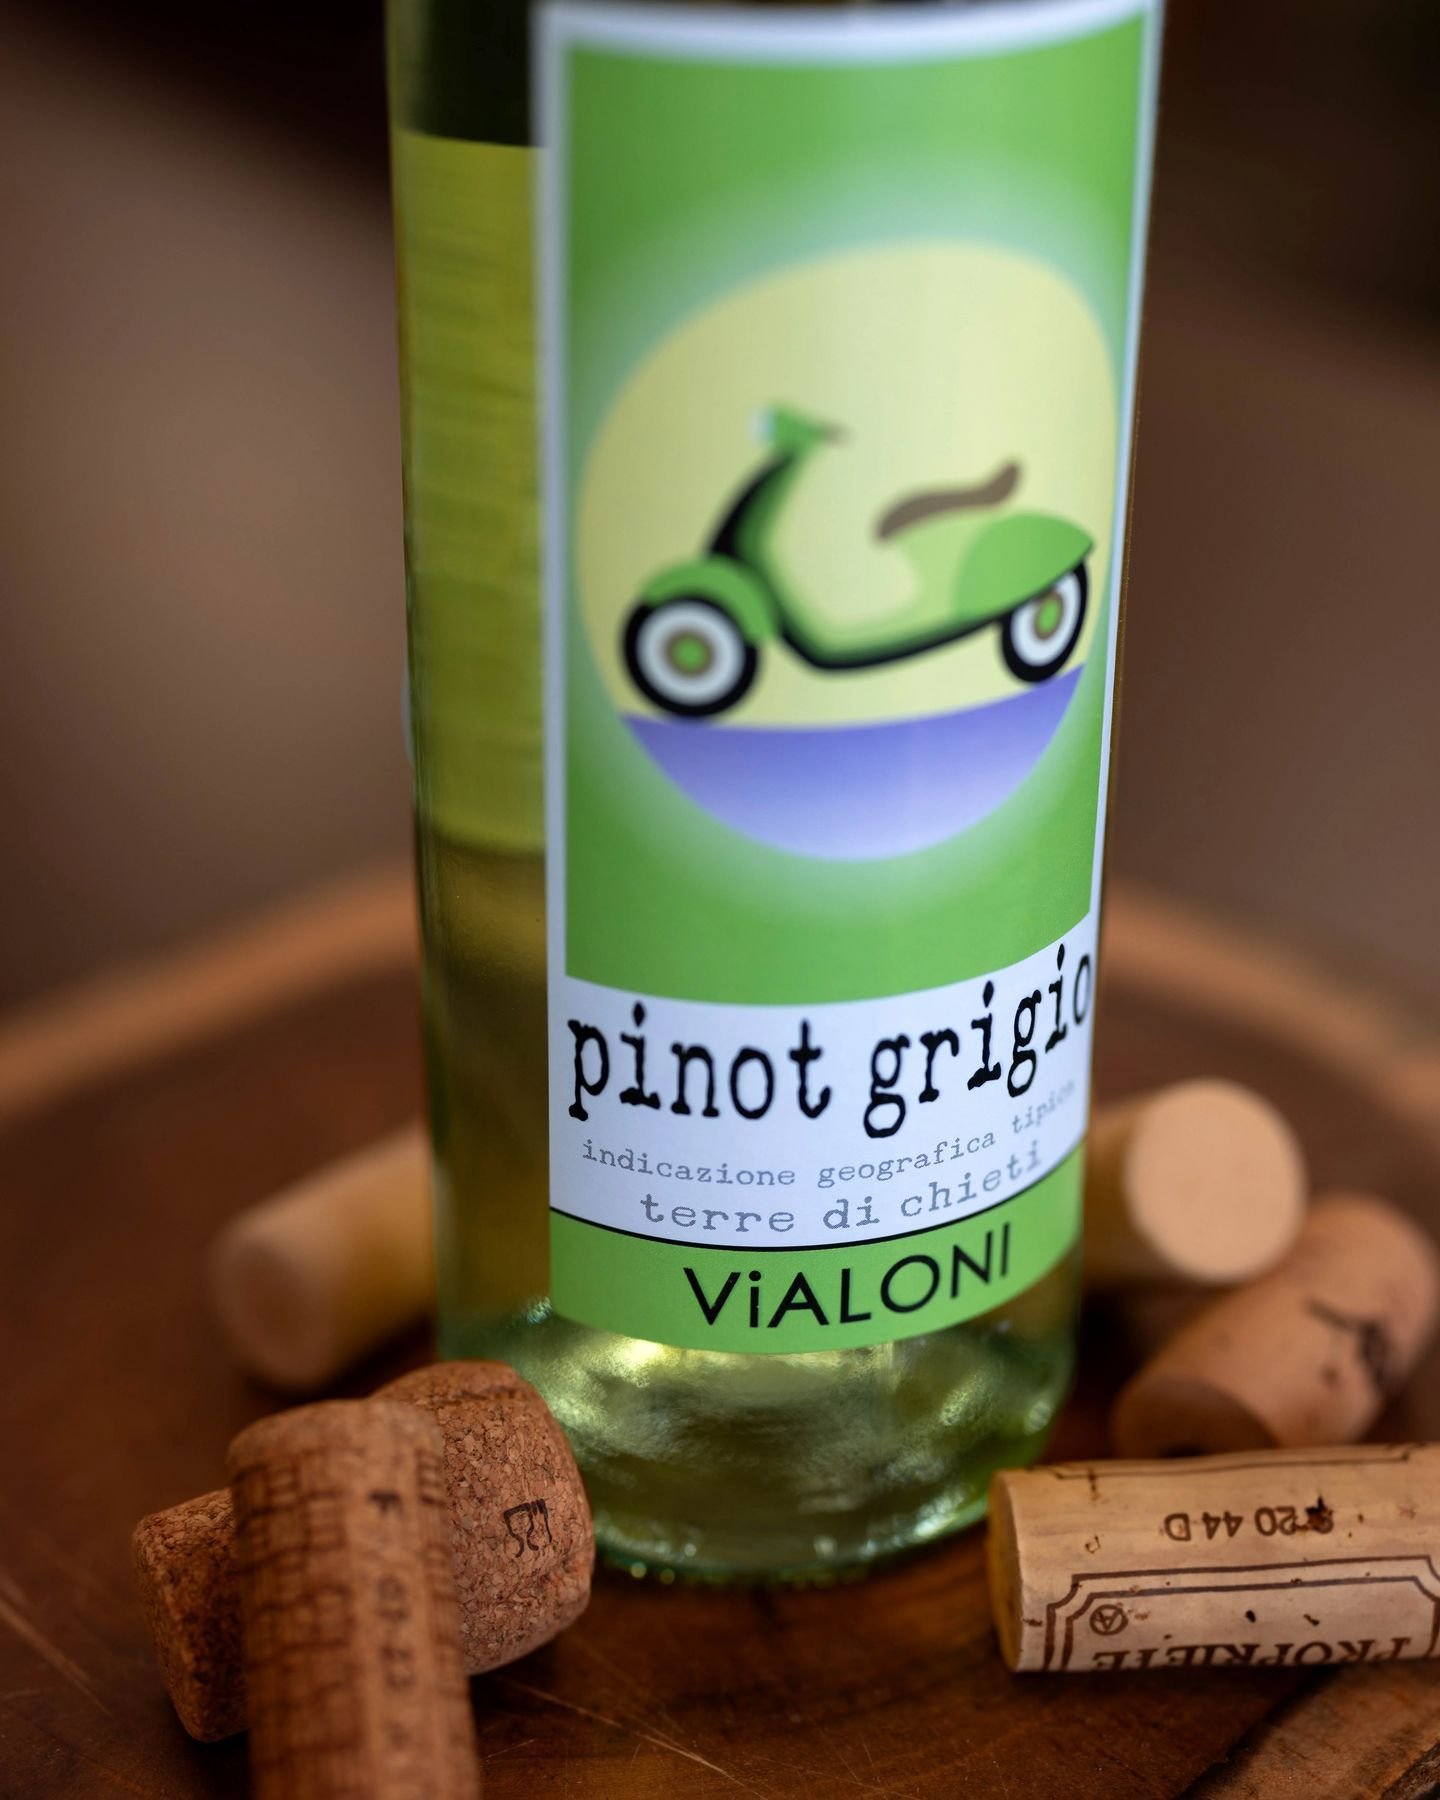 🍷Decisions shape our experiences. And what better decision than to pour a glass of Vialoni Pinot Grigio Delle Venezie? Its straw yellow color hints at the delightful journey you're about to embark upon. 
. 
🍏Unfolding on your palate are notes of fr